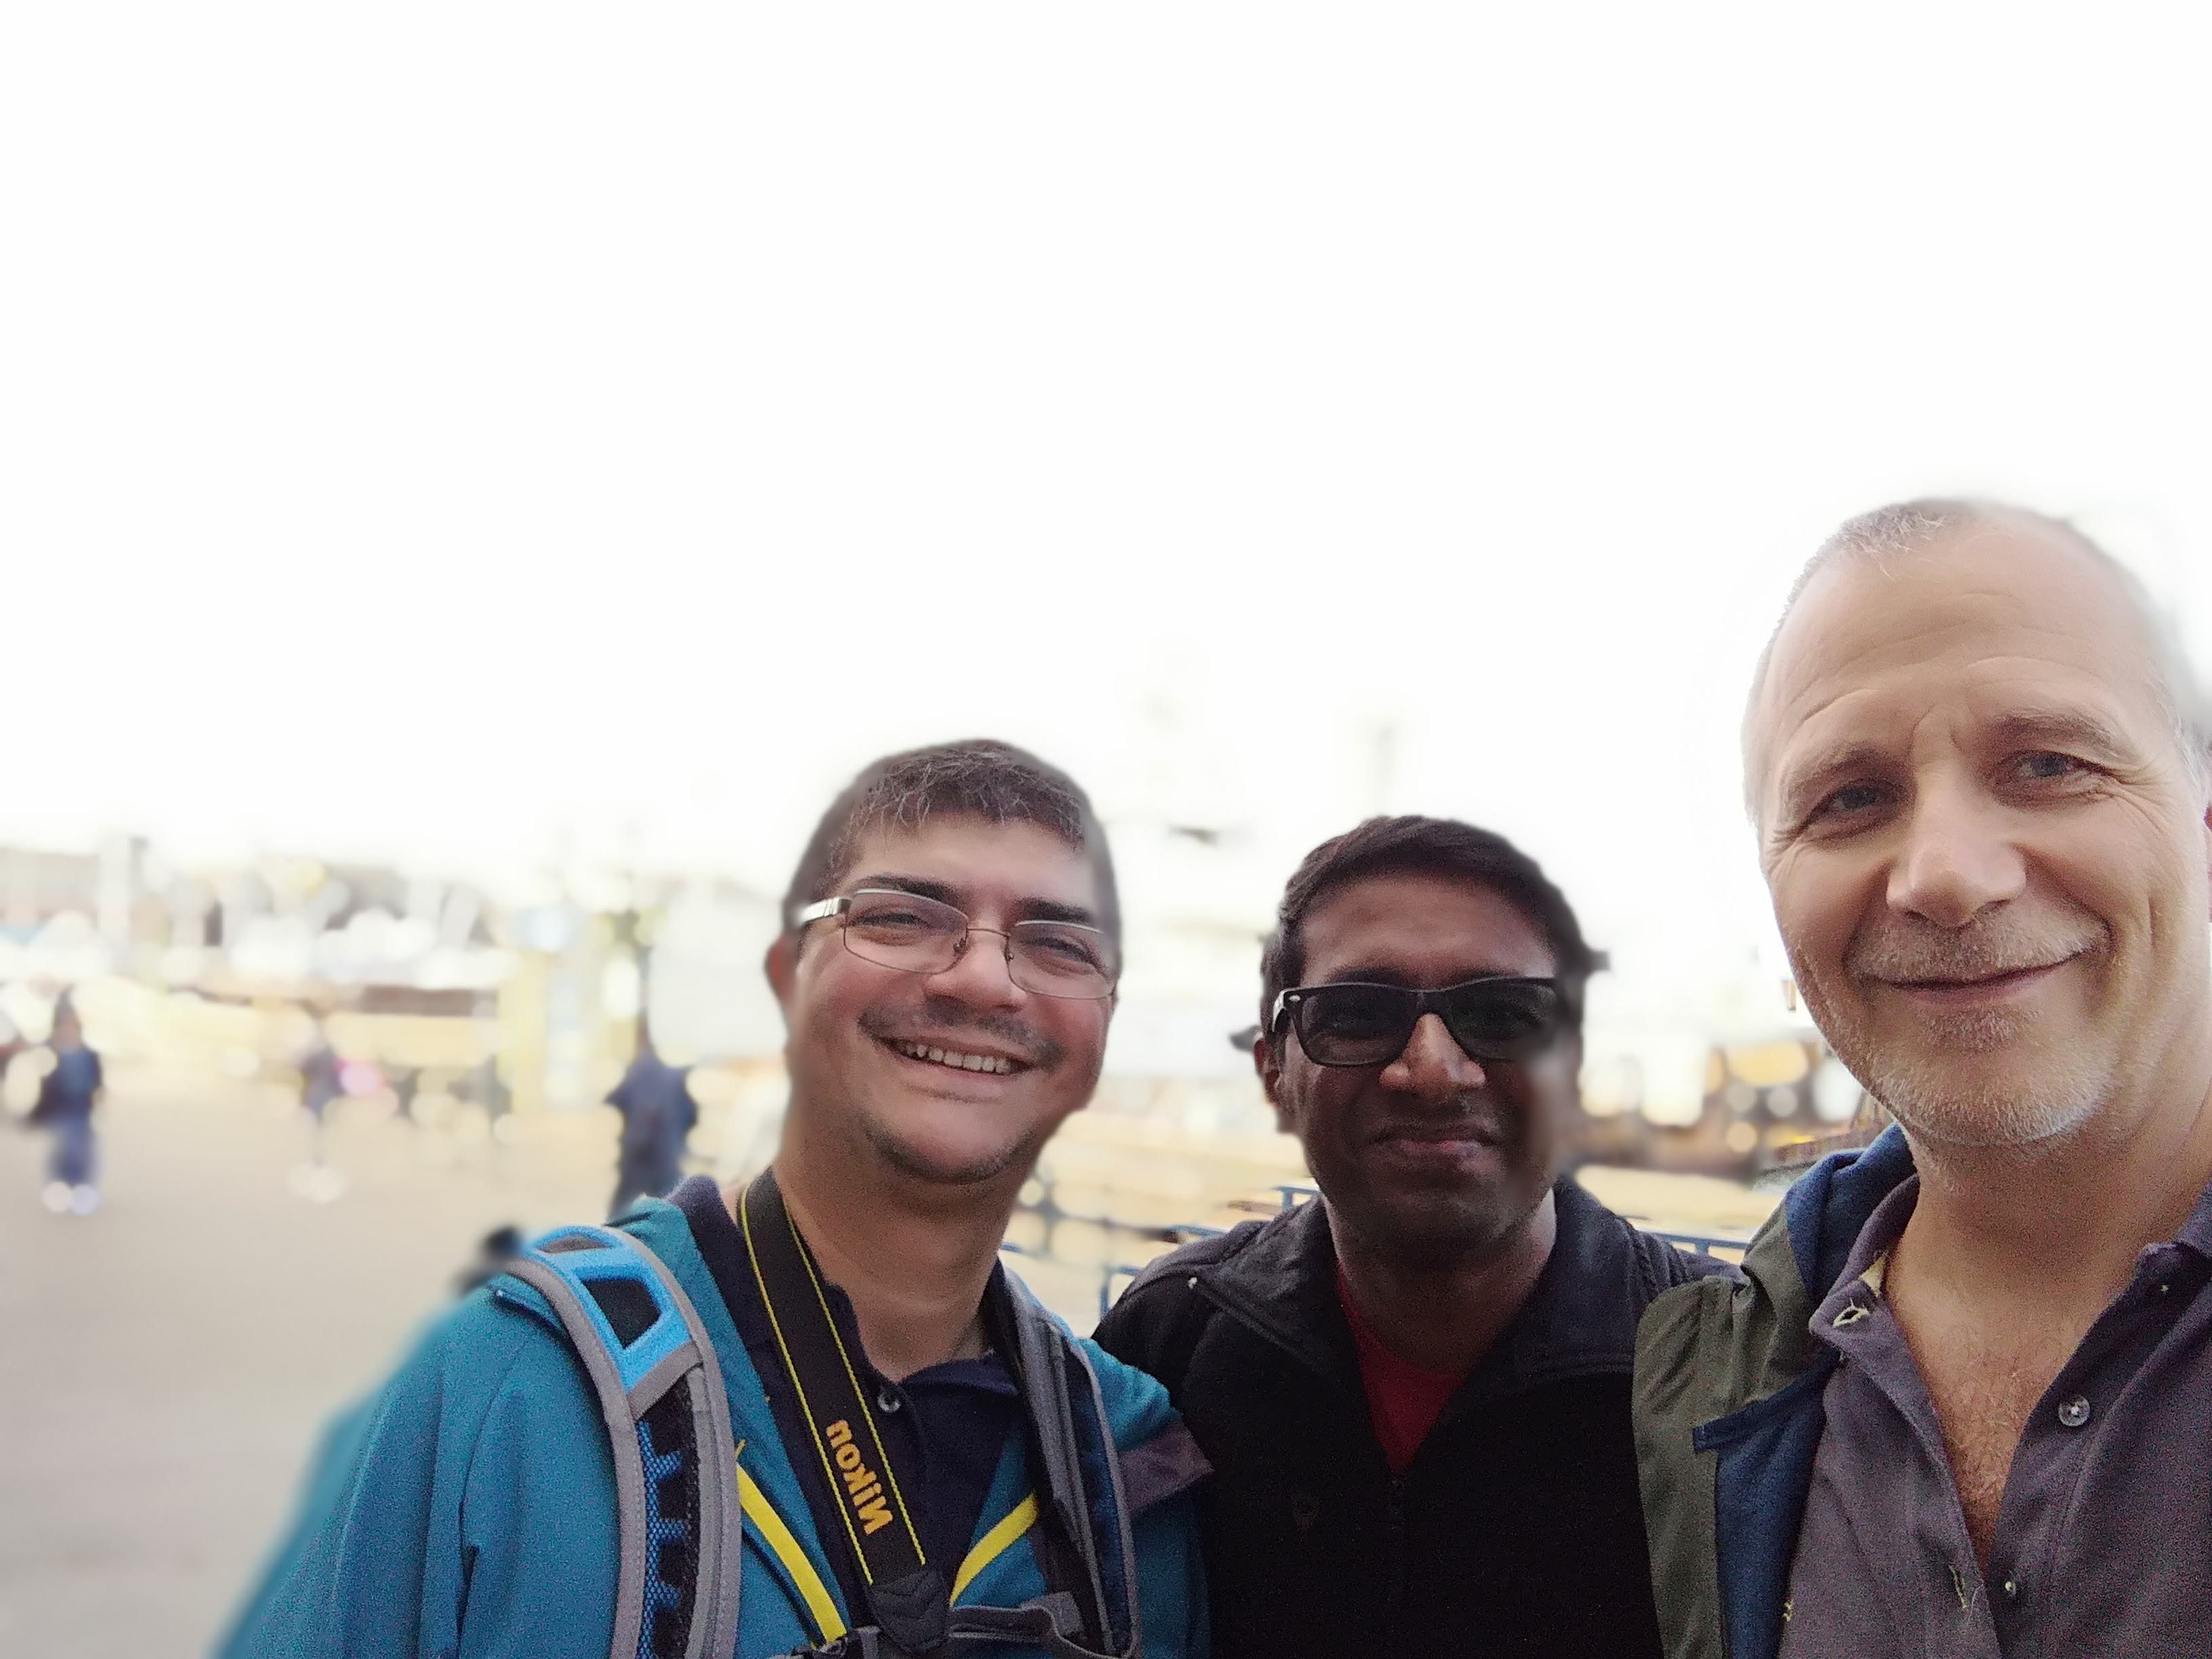 Caption: Selfie in the morning for three Connect Moderators: @FaridMonti - @IlankocanT - @ermest